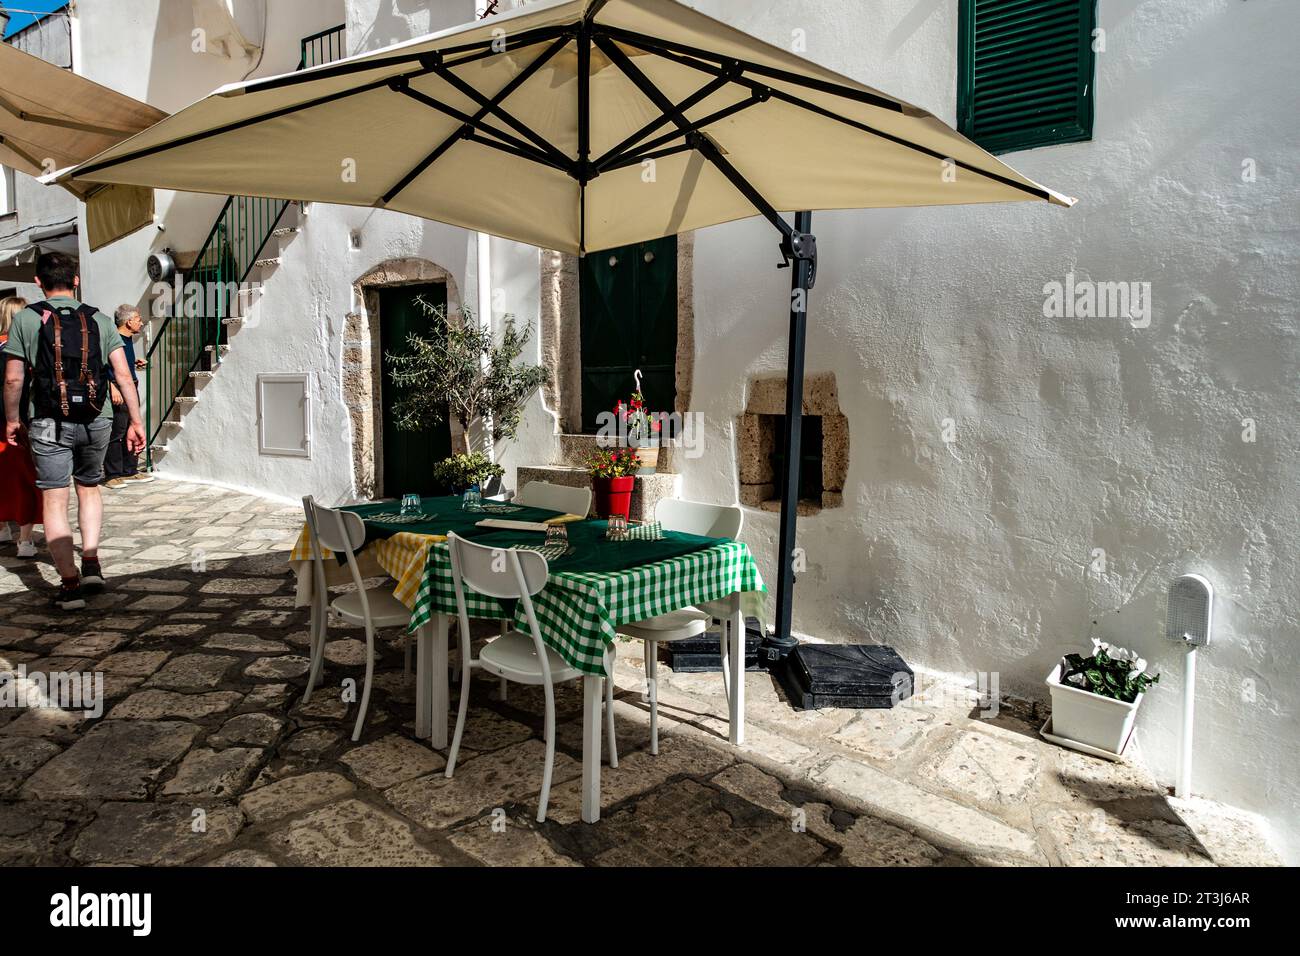 An empty restaurant table covered in green gingham,  ready for customers in Ostuni, Italy. Stock Photo